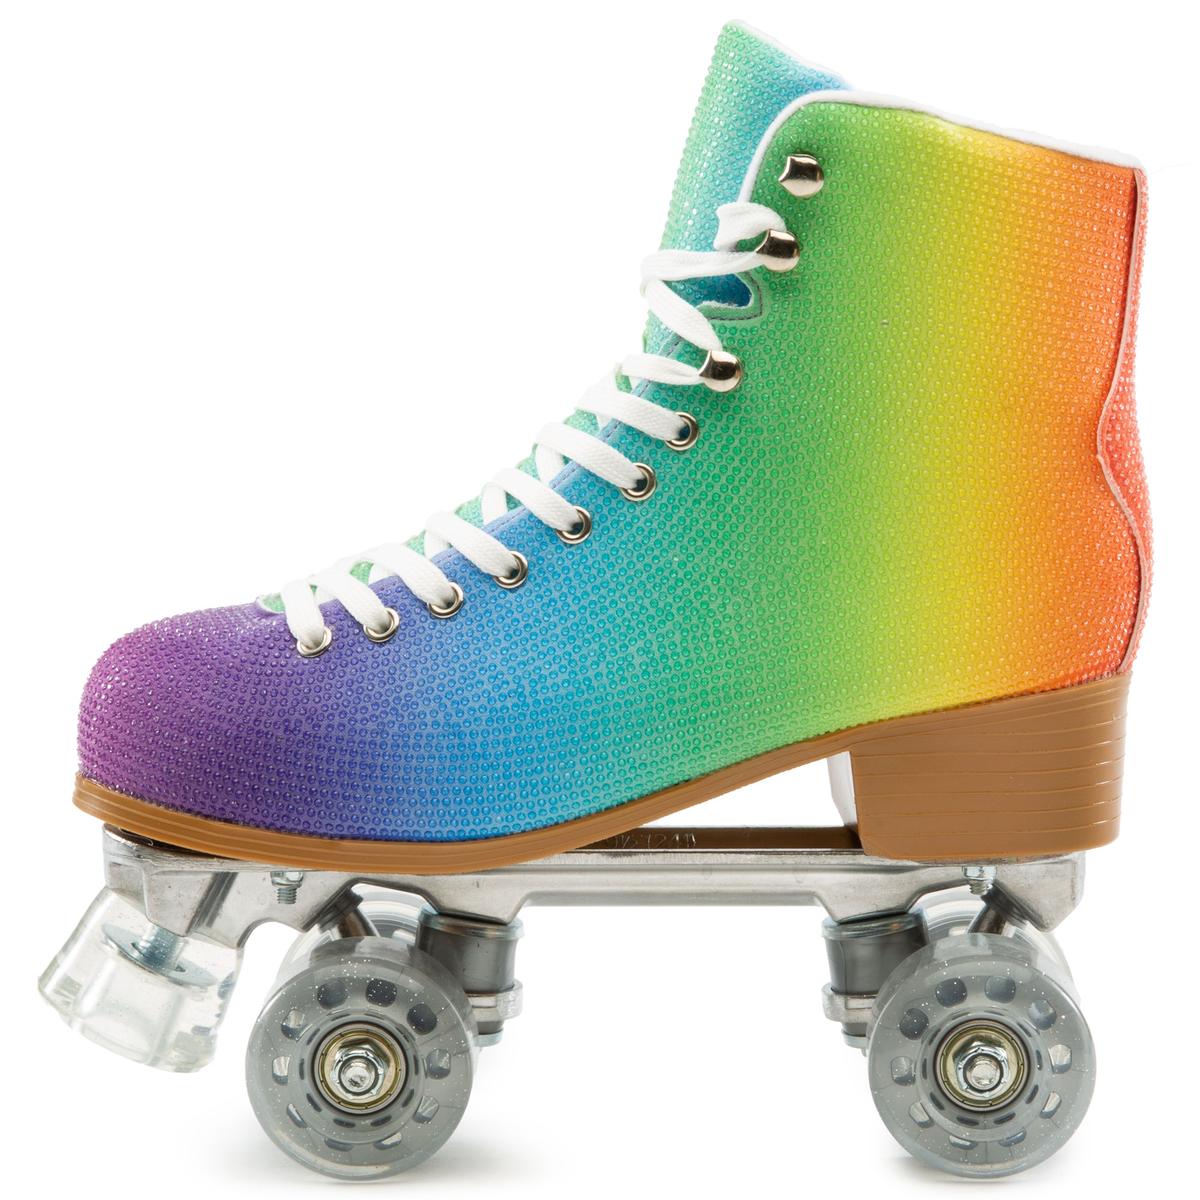 Archie-15 Laceup Roller Skates